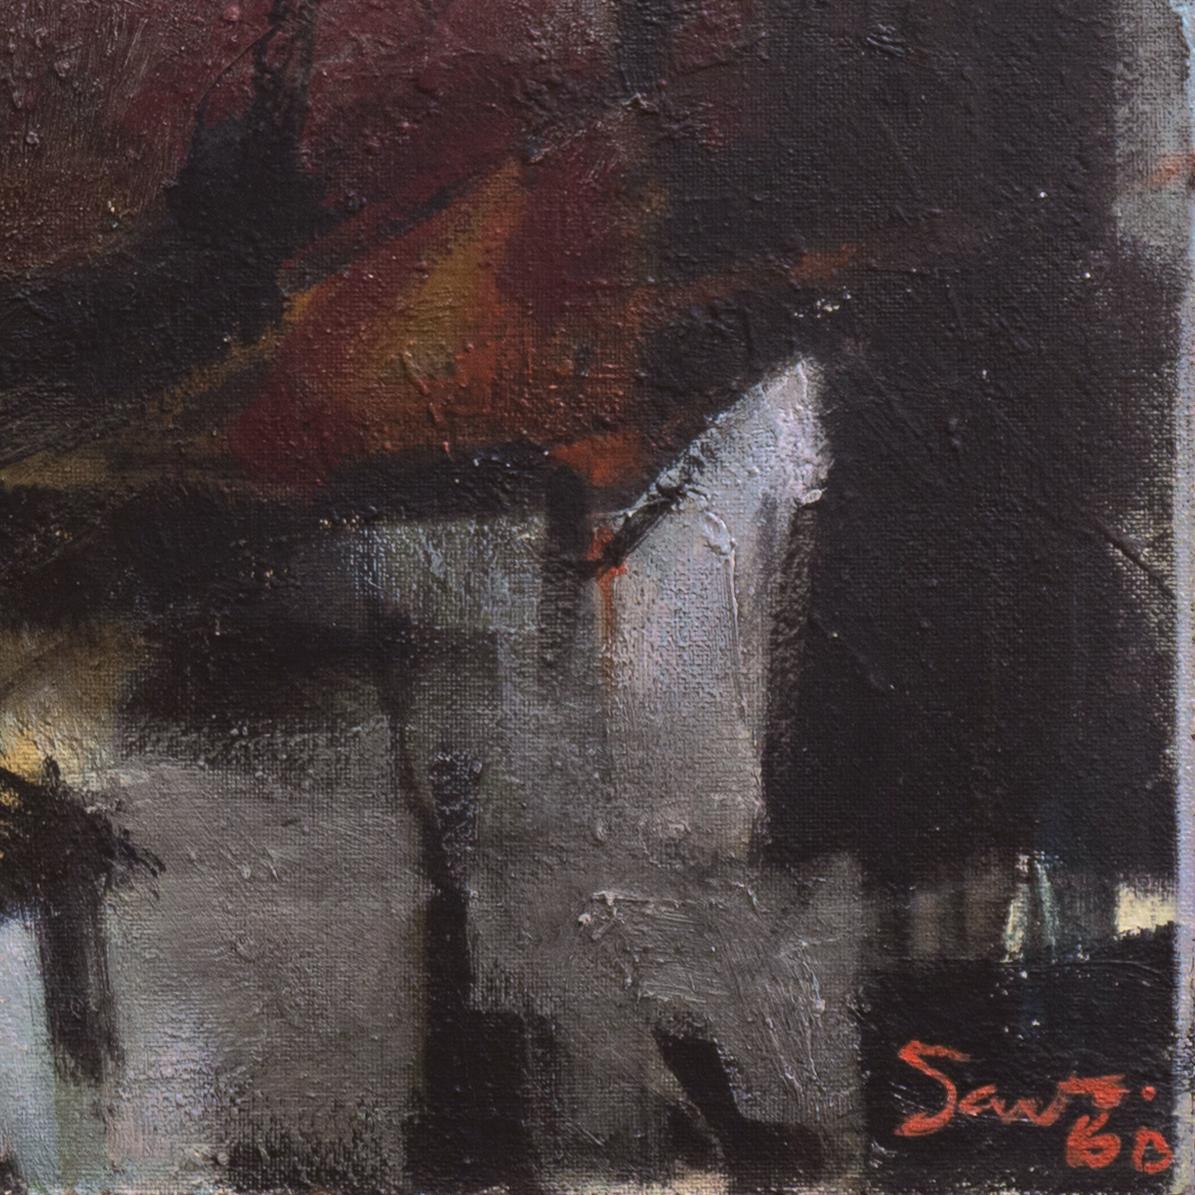  'City Lights' San Francisco Beat Generation, Woman Artist, Bay Area Abstraction - Painting by Joan Savo